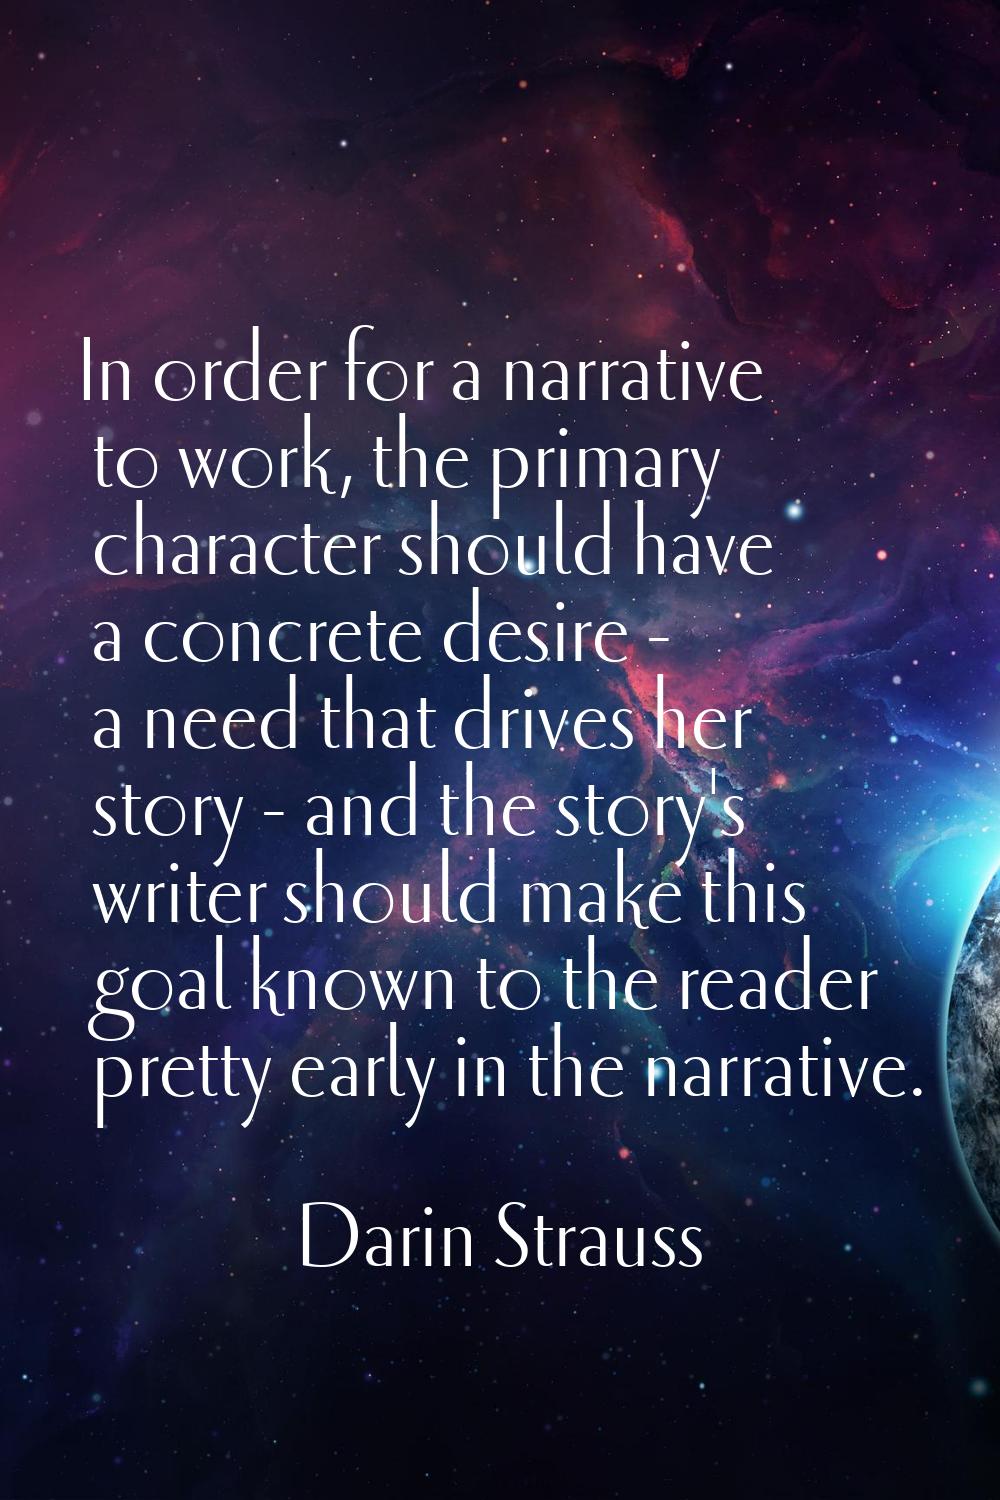 In order for a narrative to work, the primary character should have a concrete desire - a need that